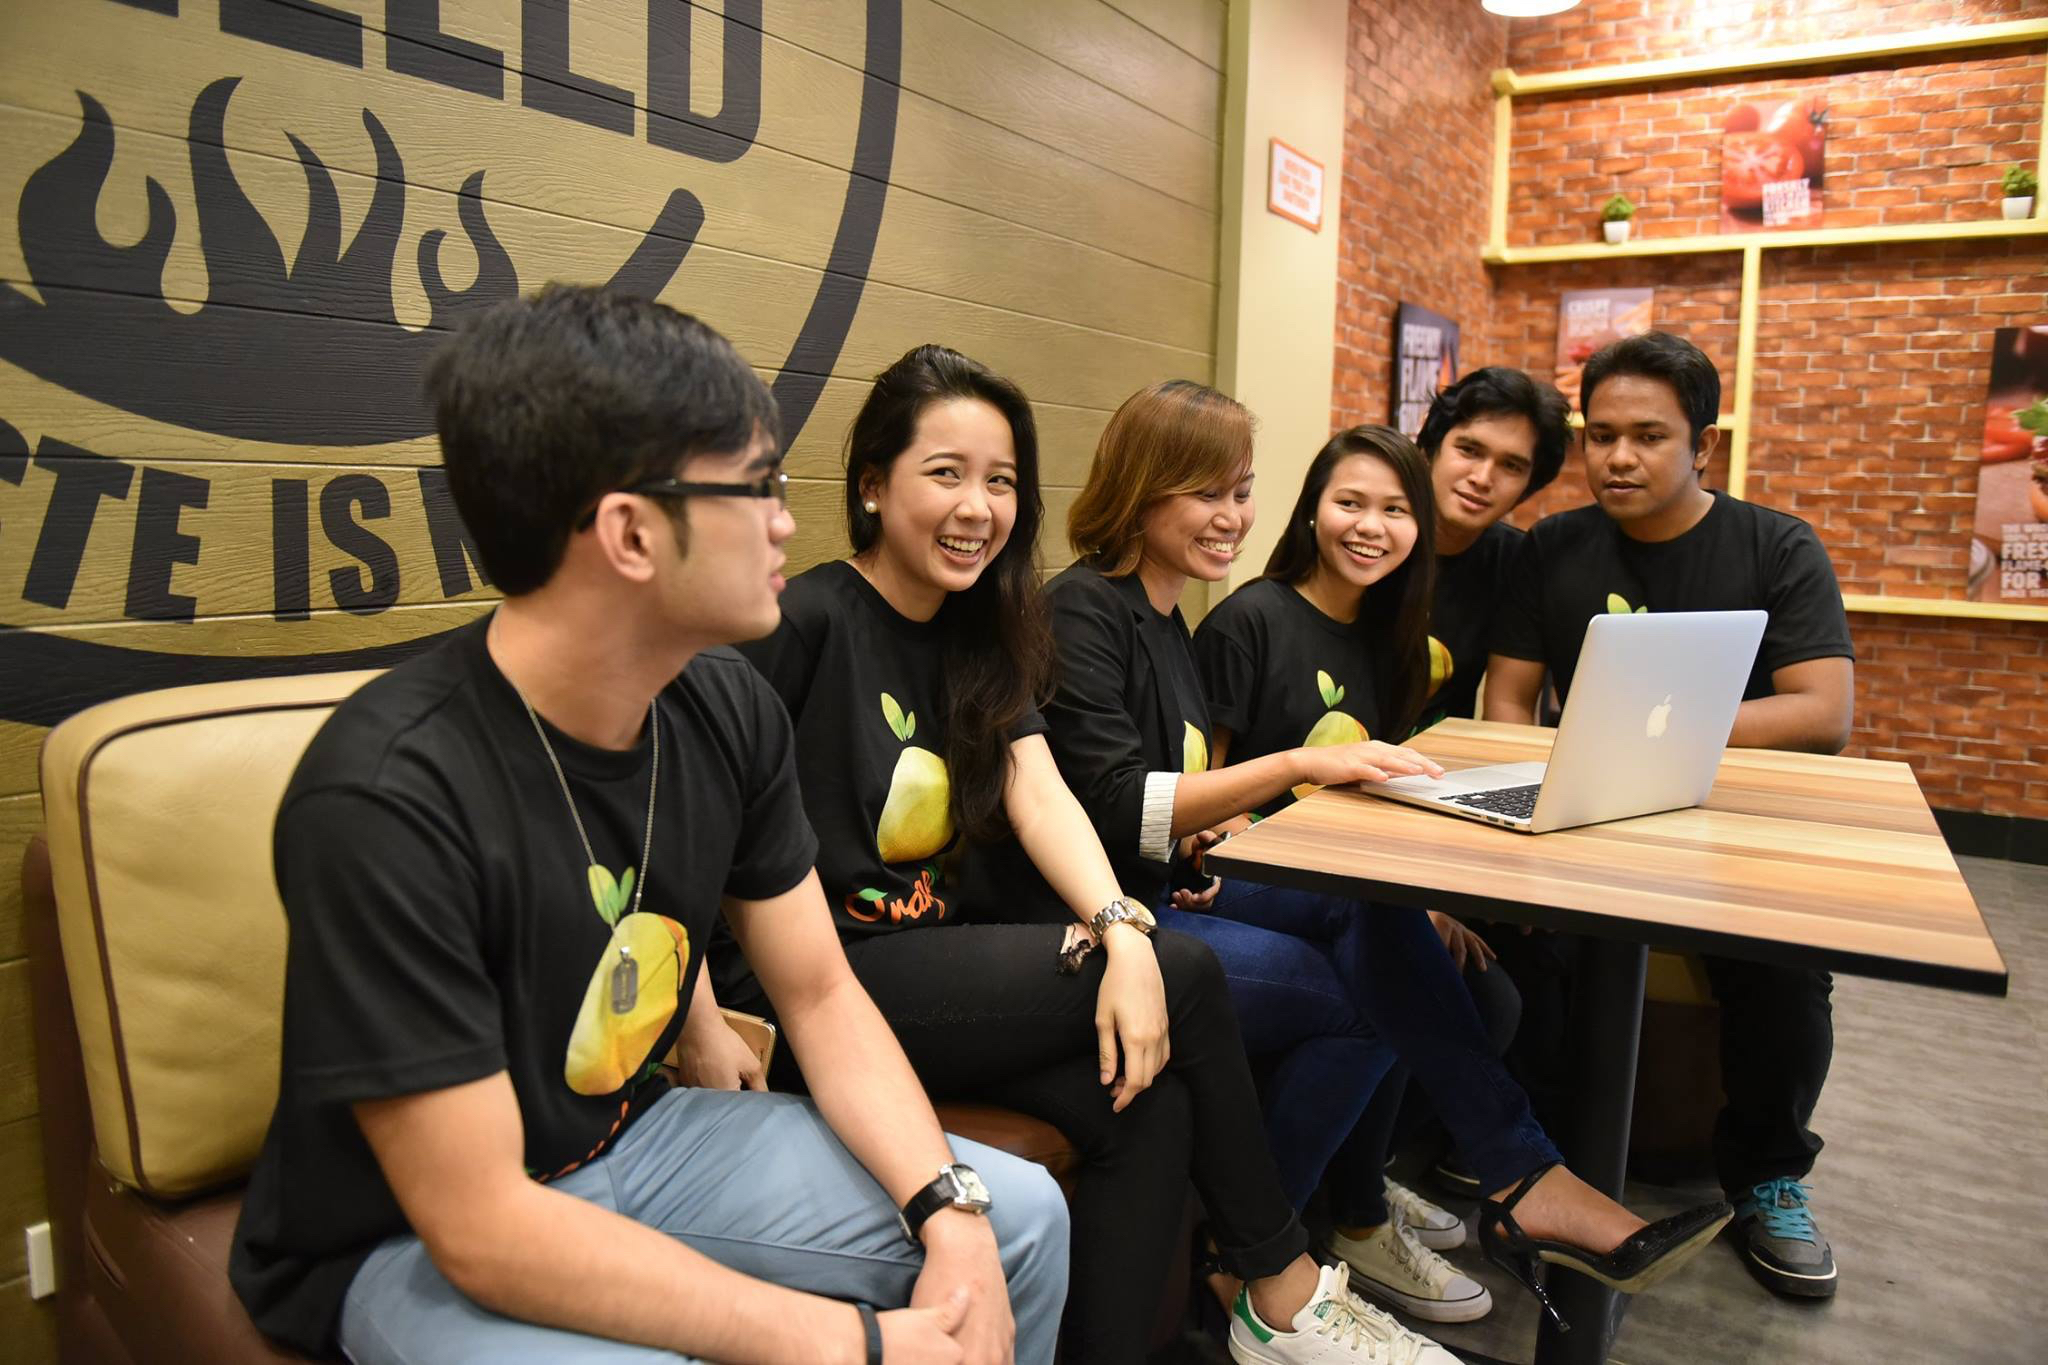 With better Internet bandwidth, students could connect with distant industry experts for education and mentoring says Mary Rose. Photo: OrangeHub